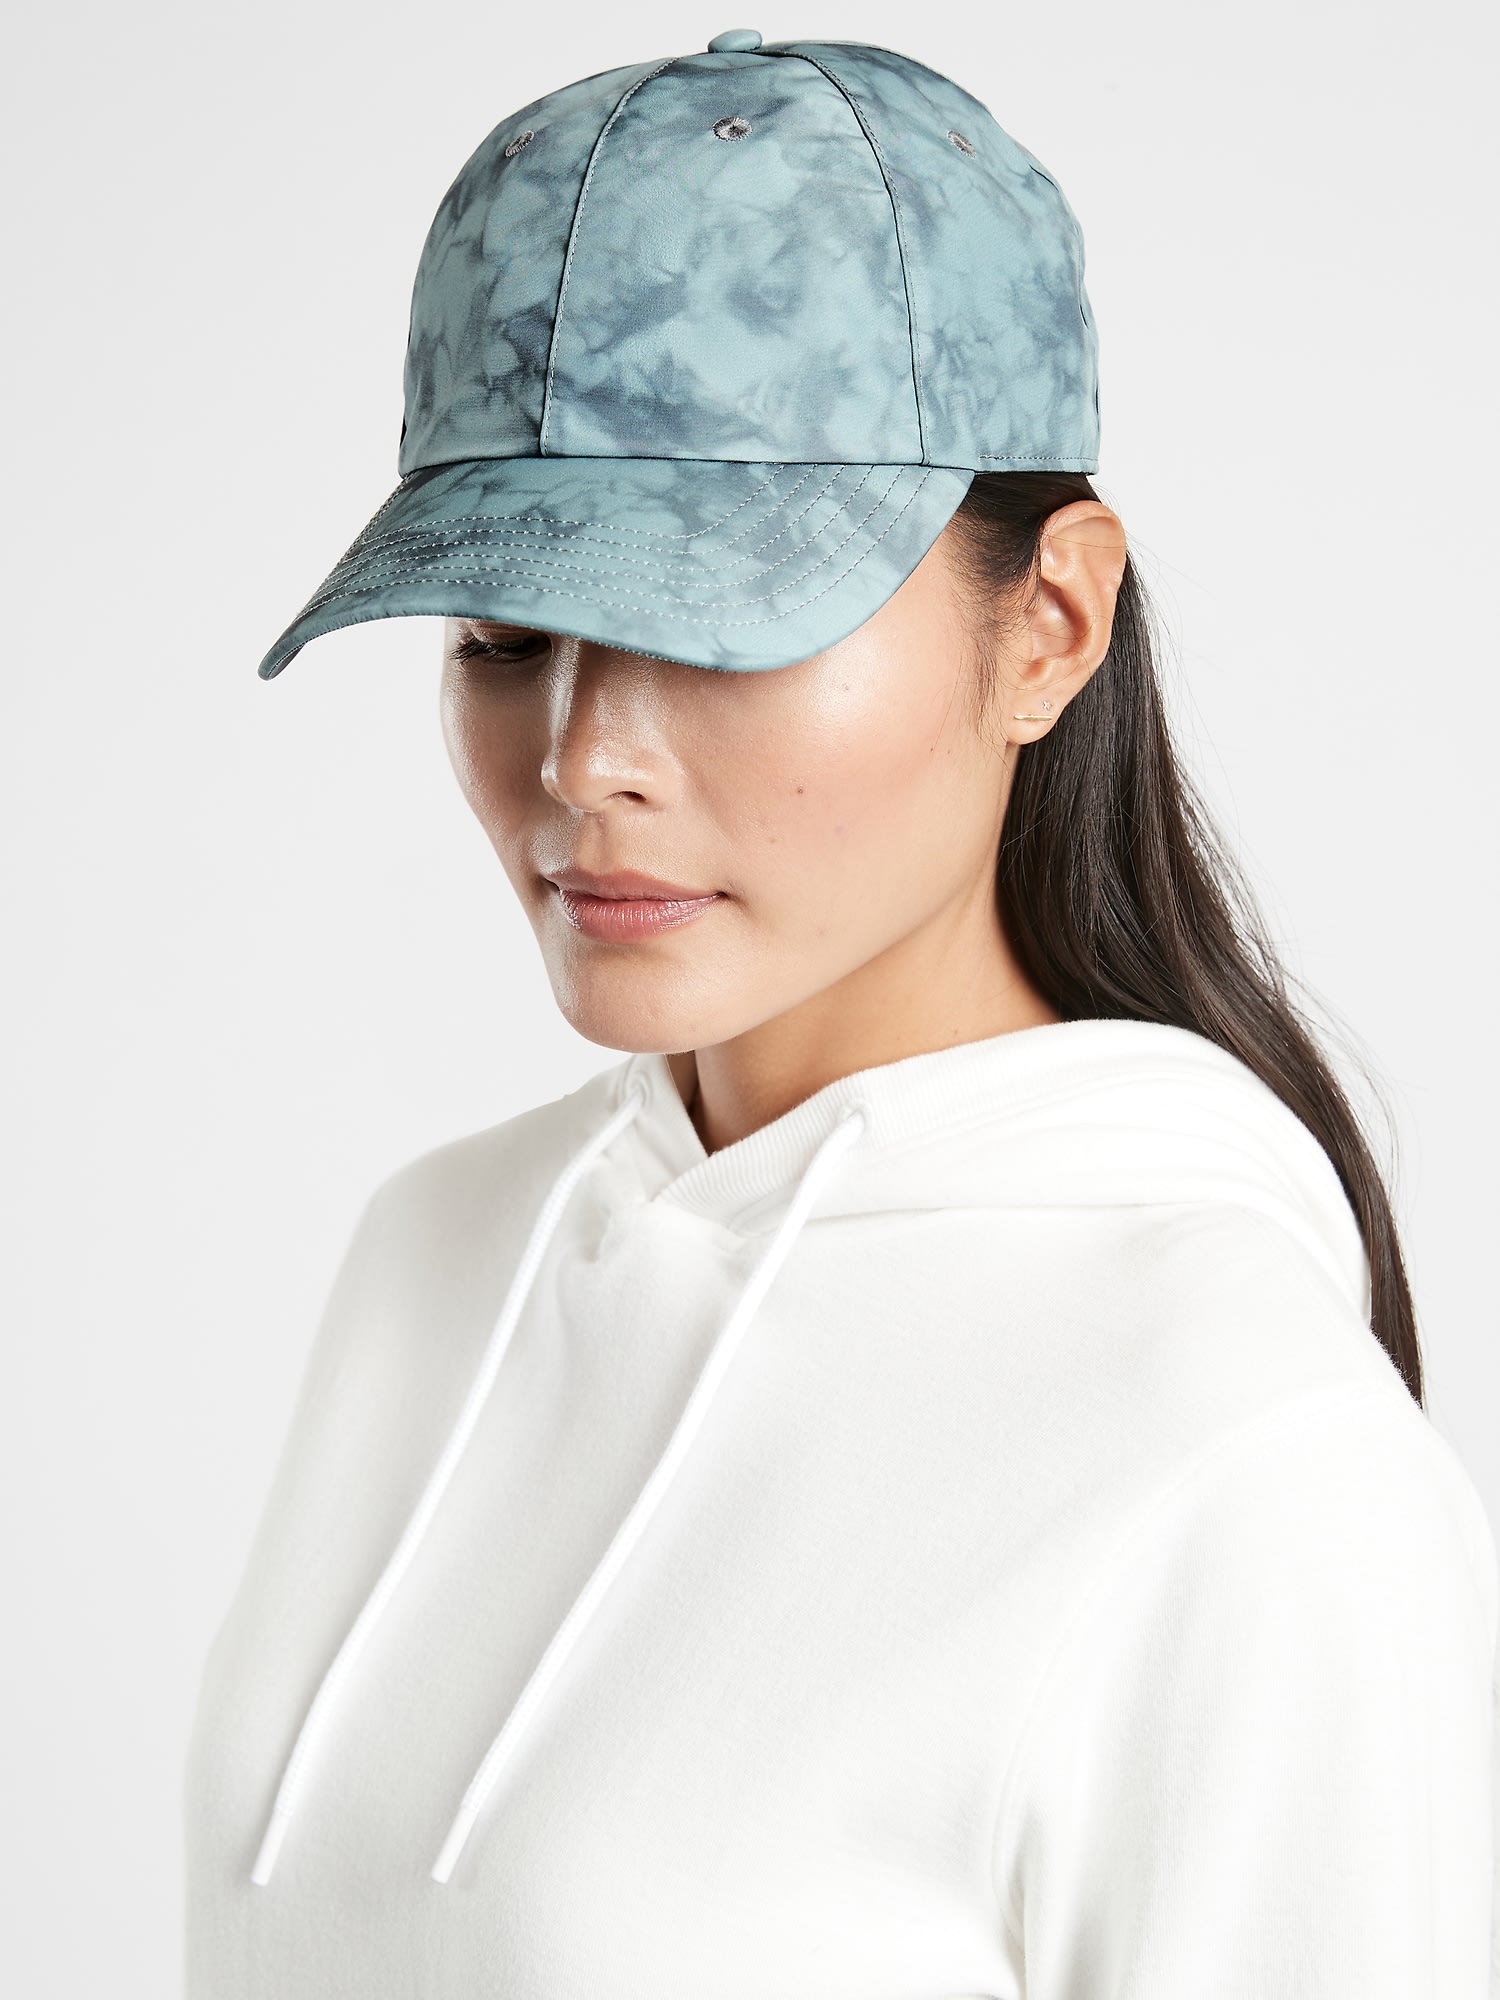 21 trendy hats for women to wear with anything in